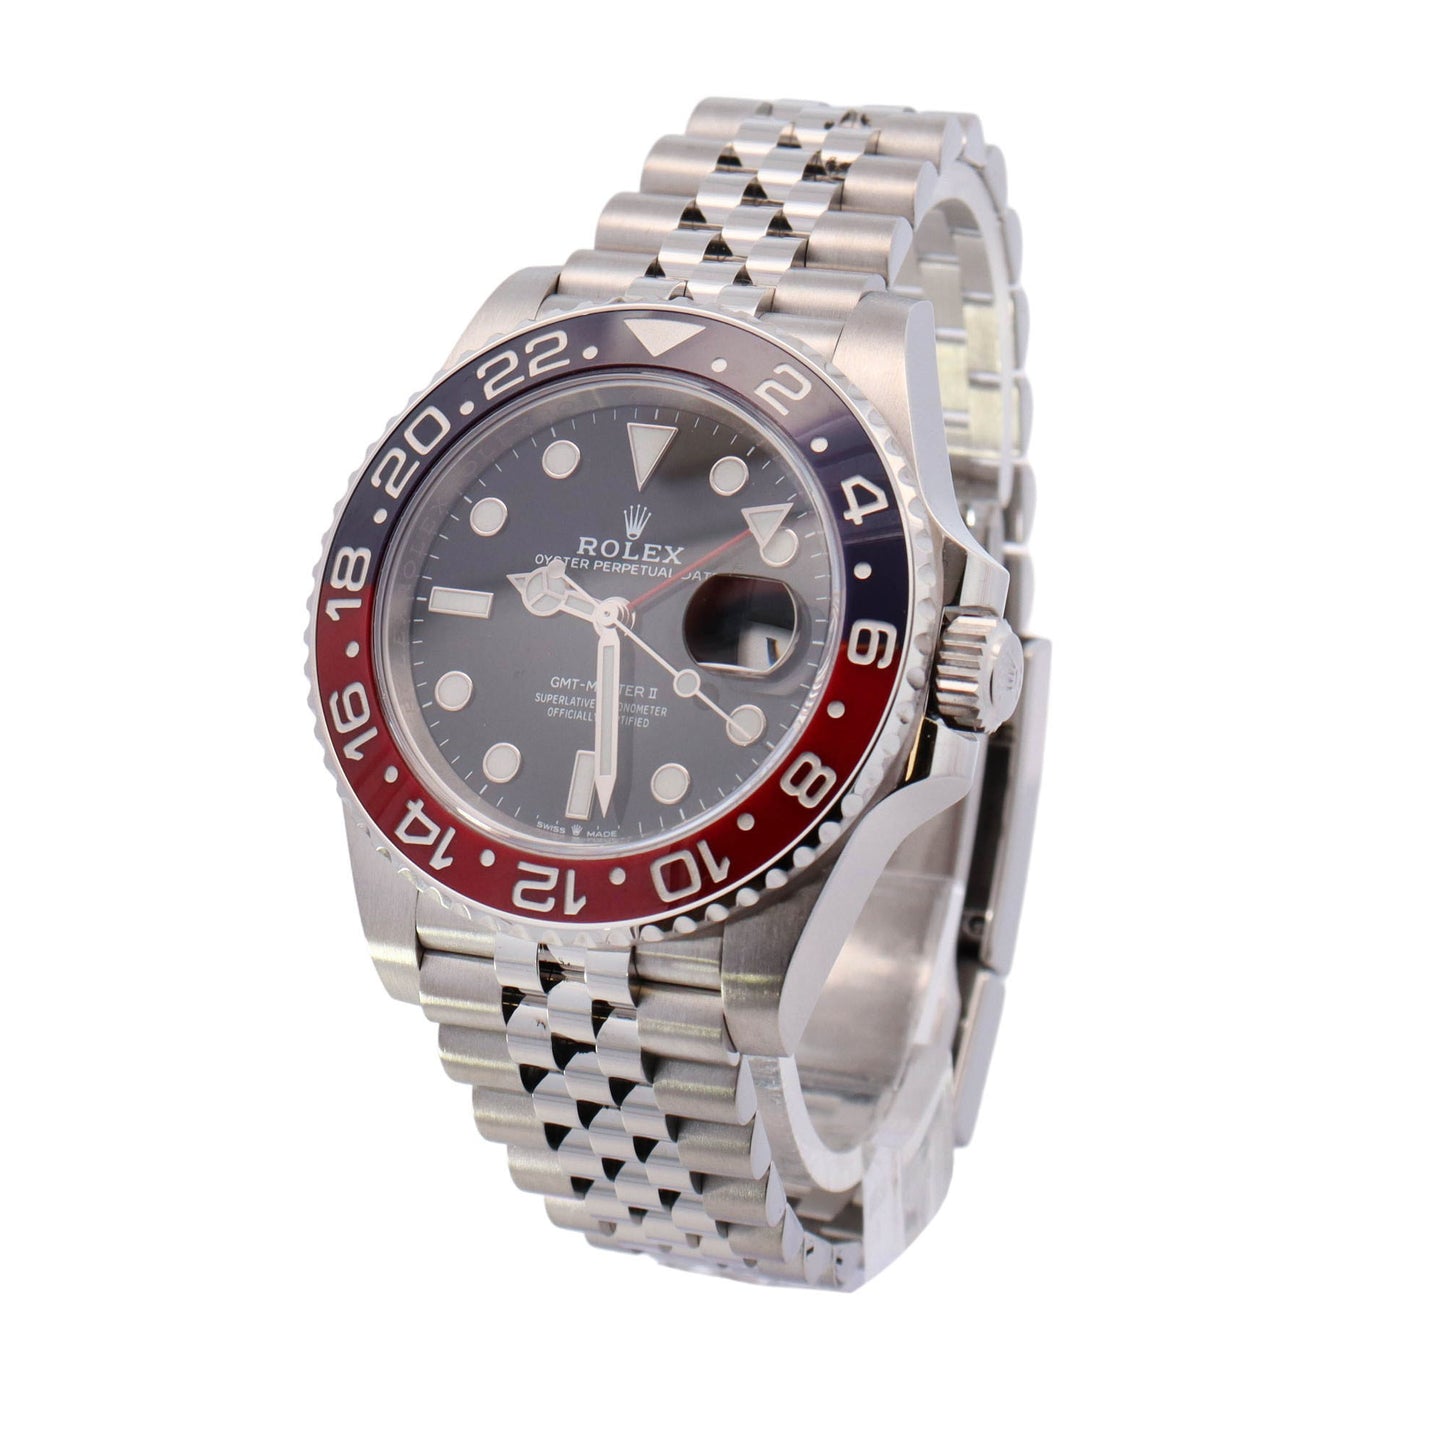 Rolex GMT Master II Stainless Steel 40mm Black Dot Dial Watch Reference# 126710BLRO